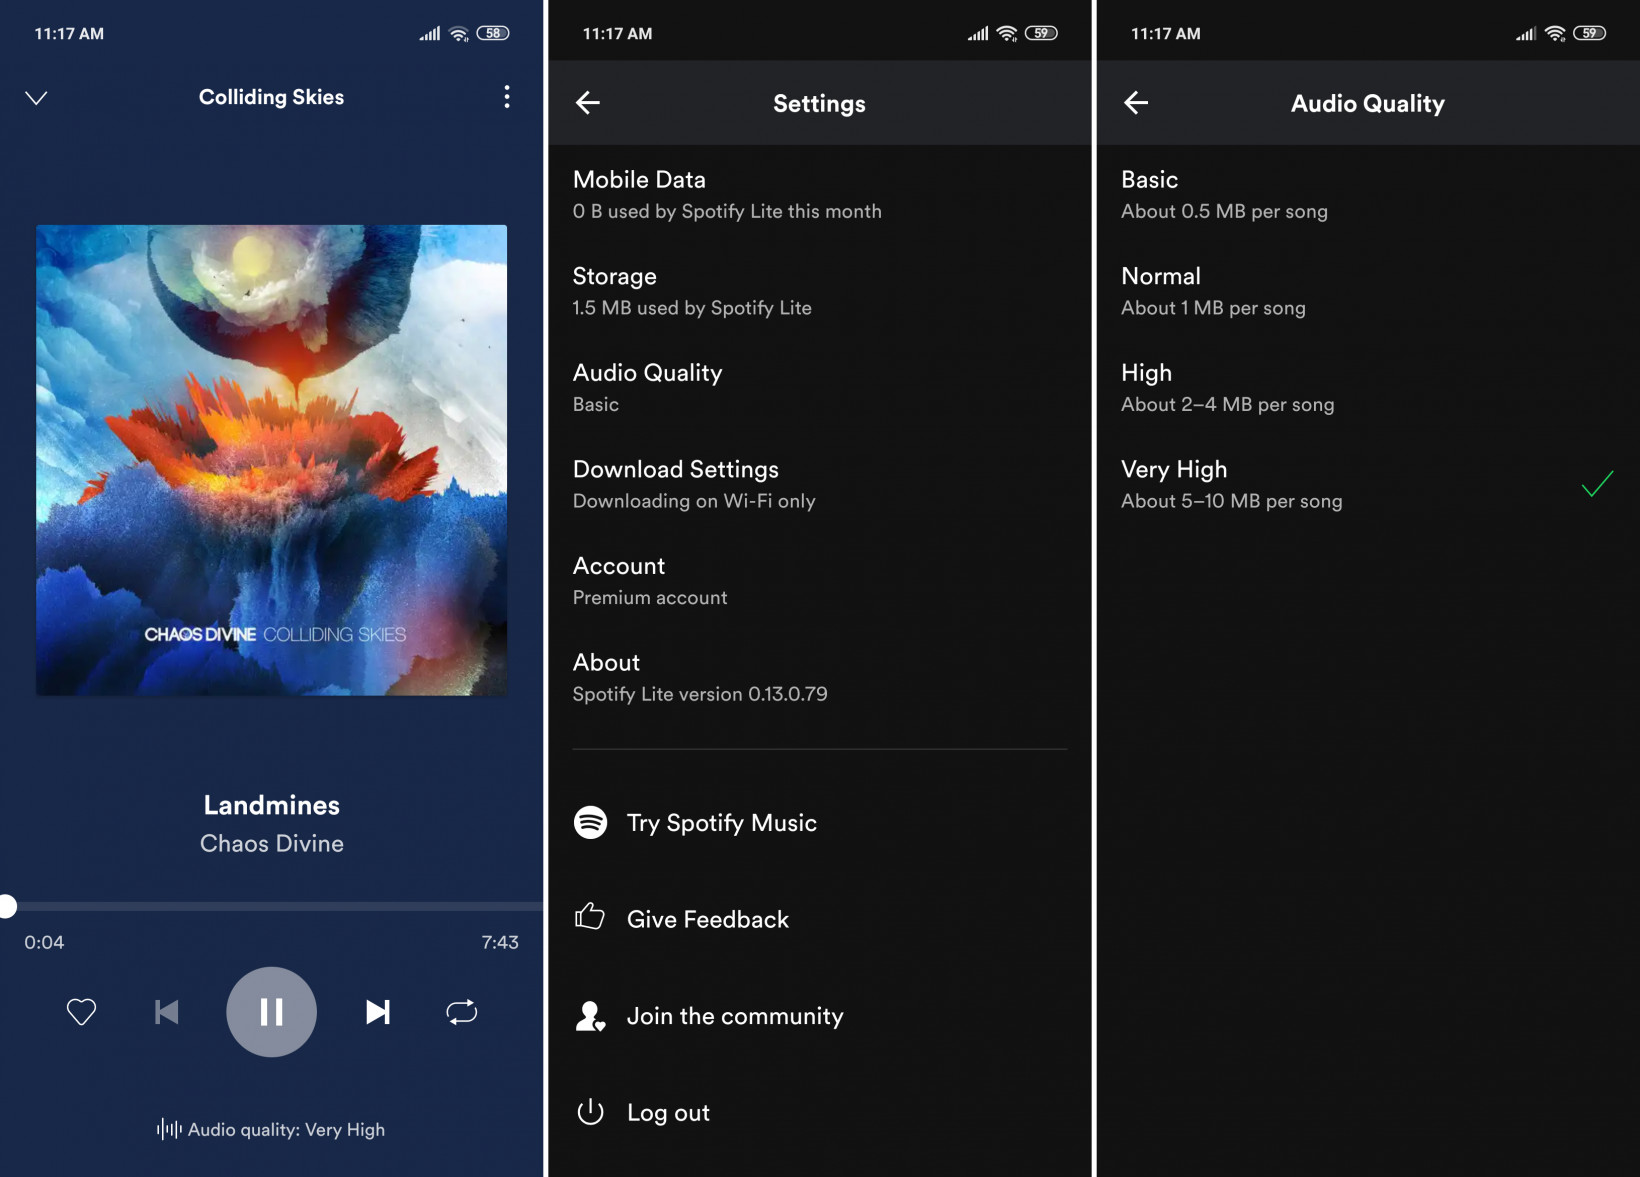 Spotify Lite gives you greater control over your mobile data usage